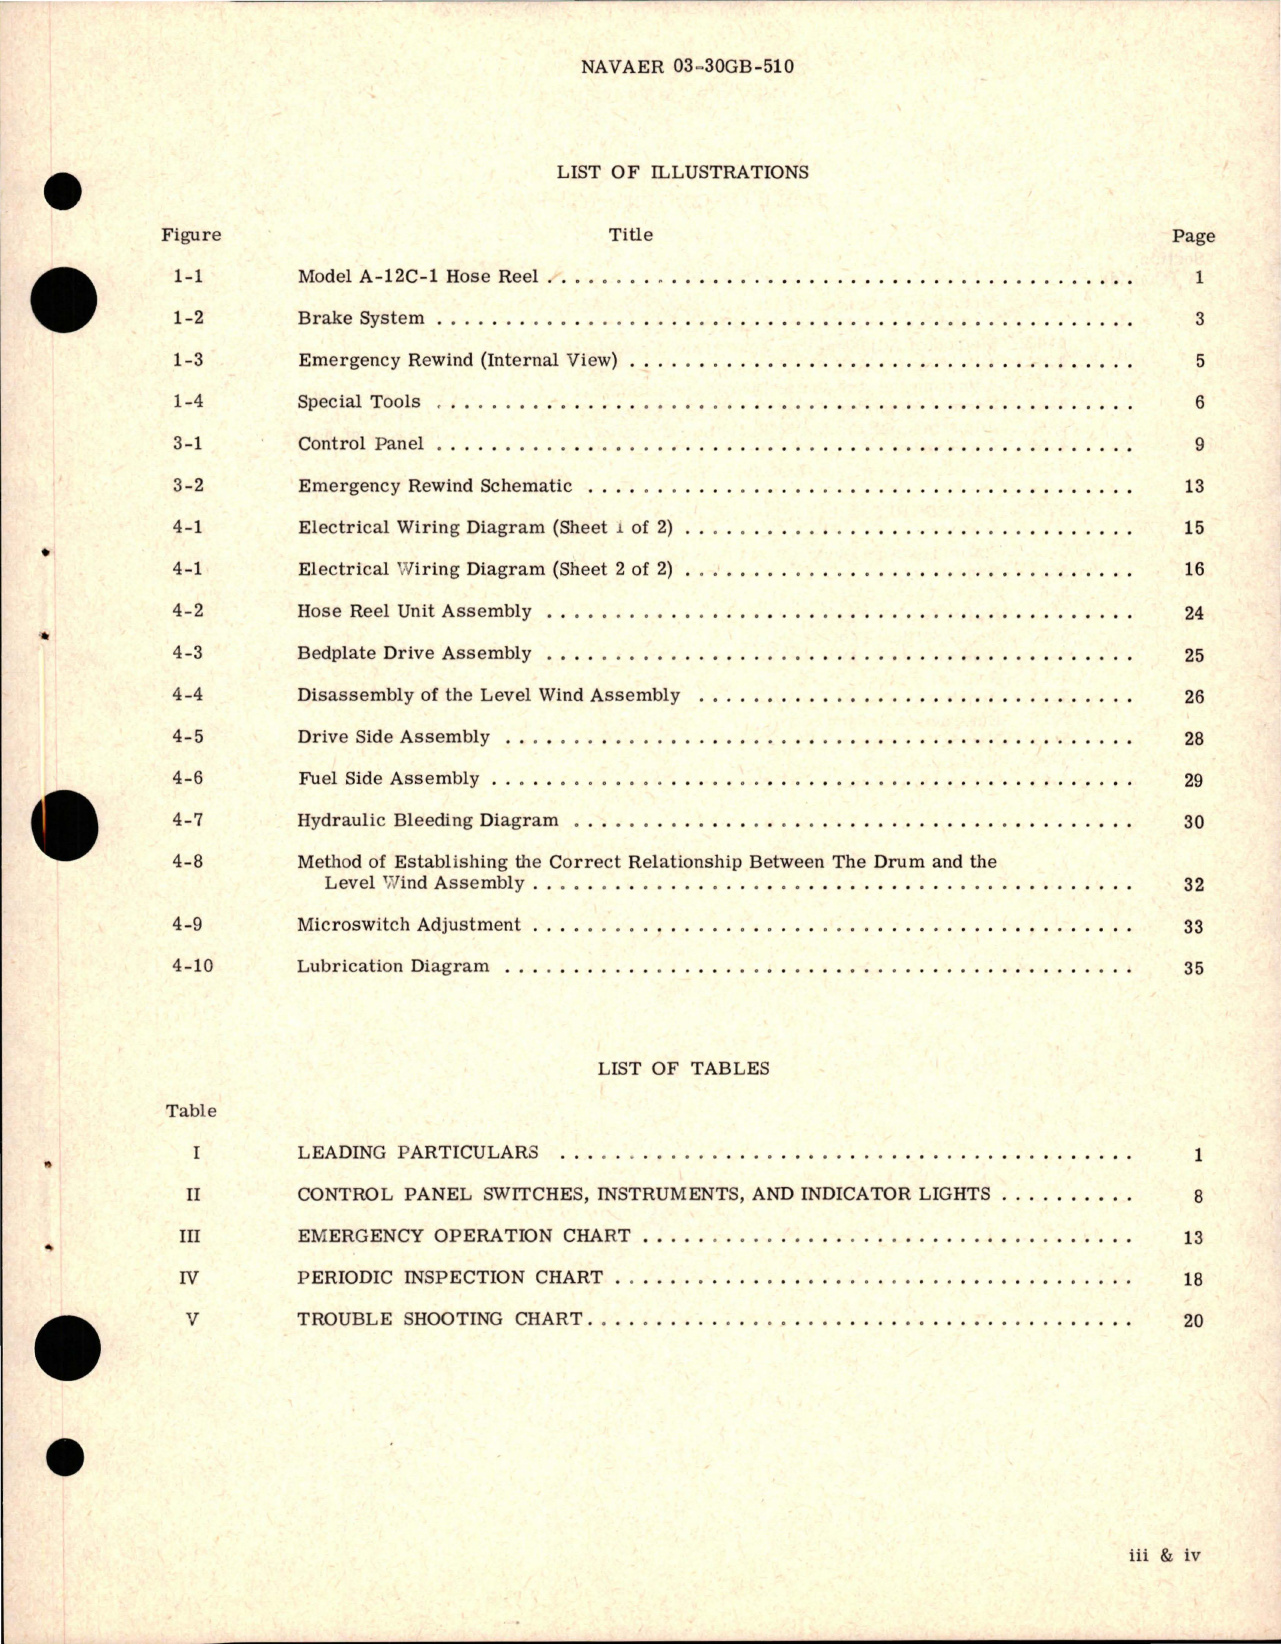 Sample page 5 from AirCorps Library document: Operation and Maintenance Instructions for Automatic Hose Reel Assemblies - Models A-12C, A-12A-2, and A-12C-1